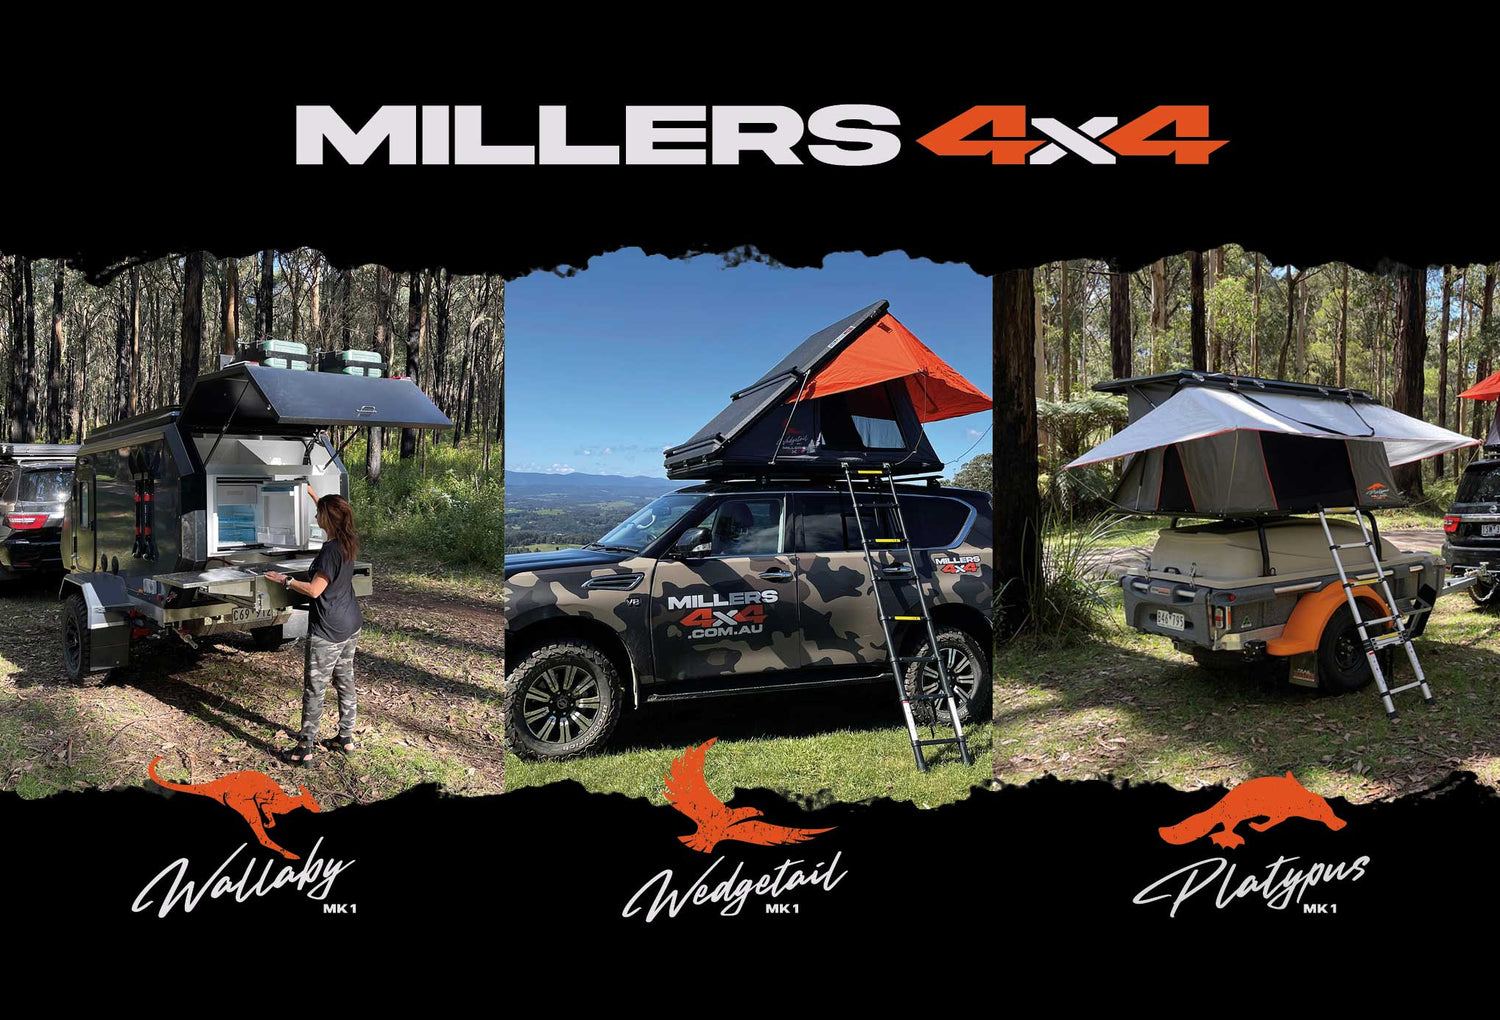 Millers 4x4 Accessories. Rooftop Tents, Camper Trailers based in Melbourne Victoria Australia. Outback 4x4, touring 4x4.